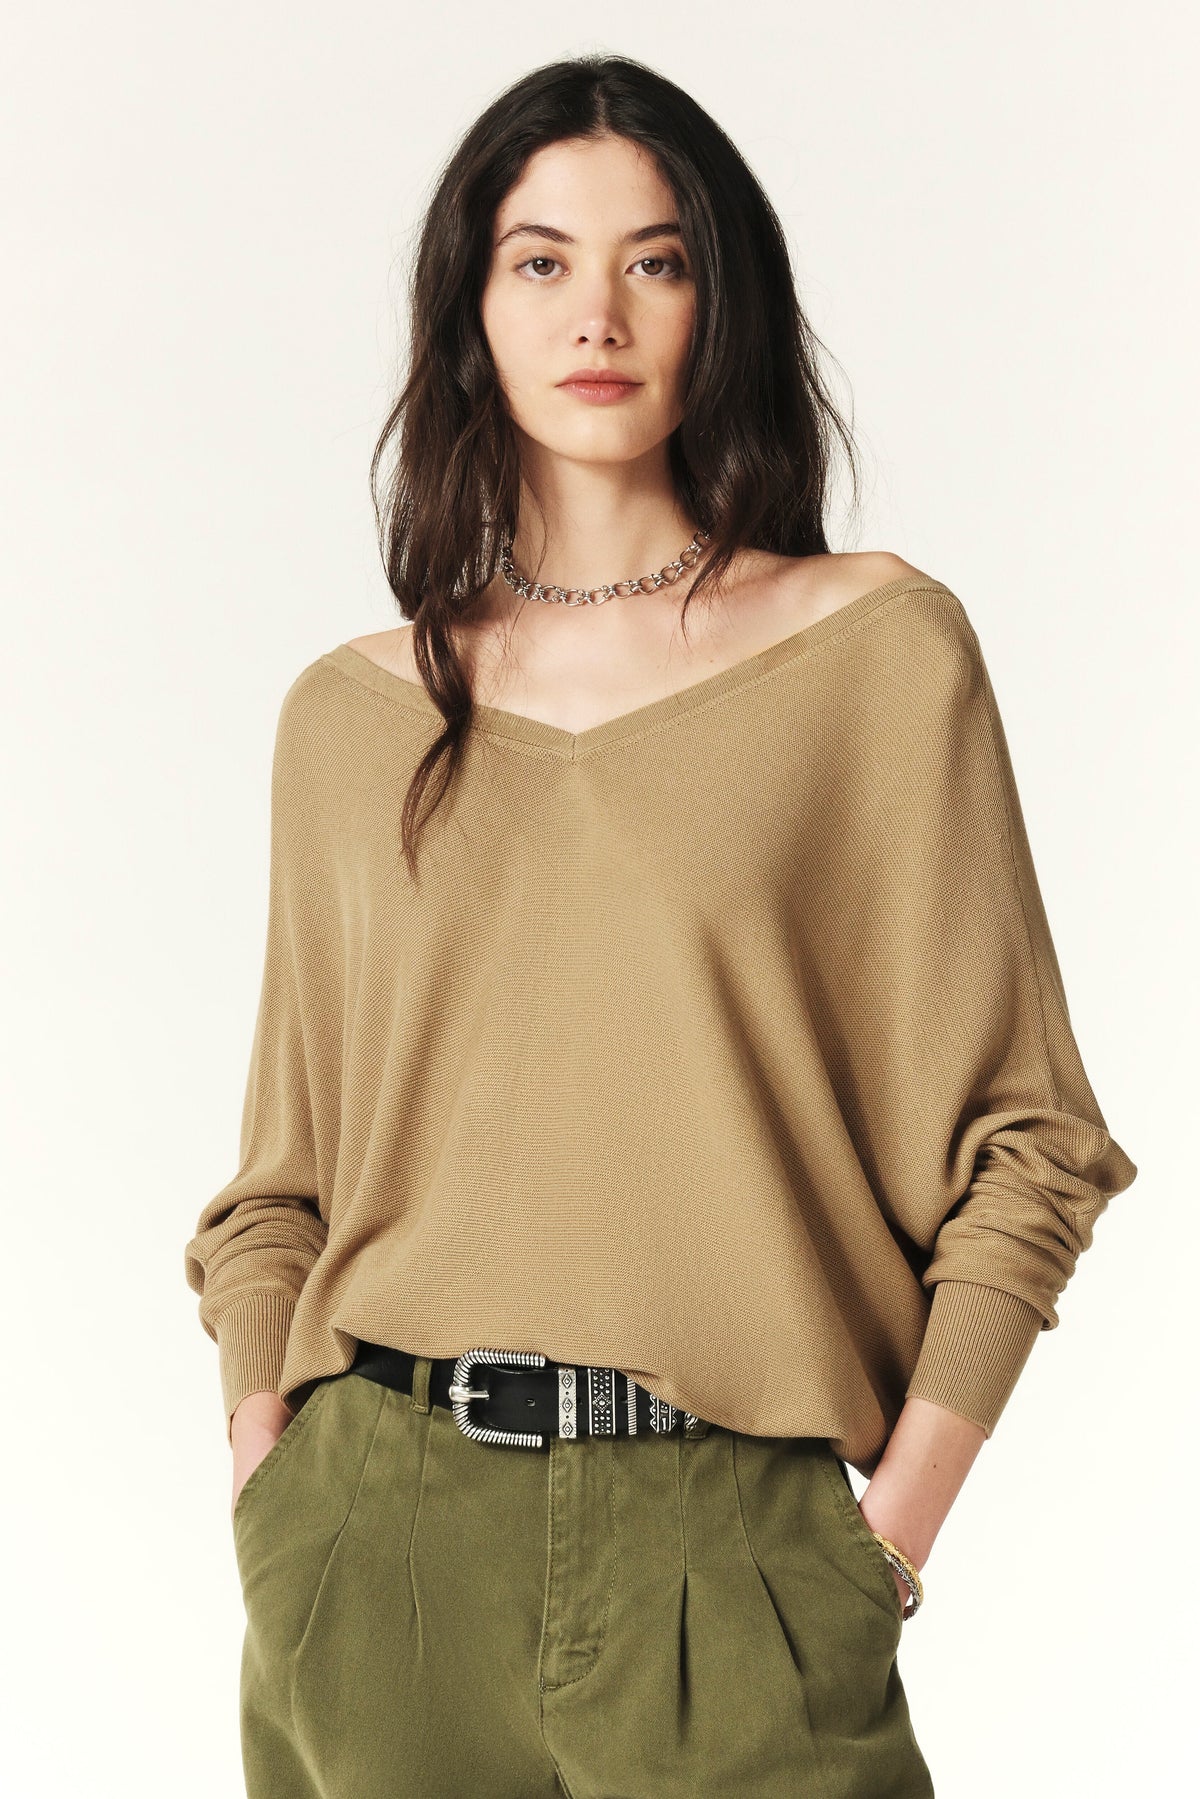 Batwing V neck light weight jumper with dropped shoulders and button backline